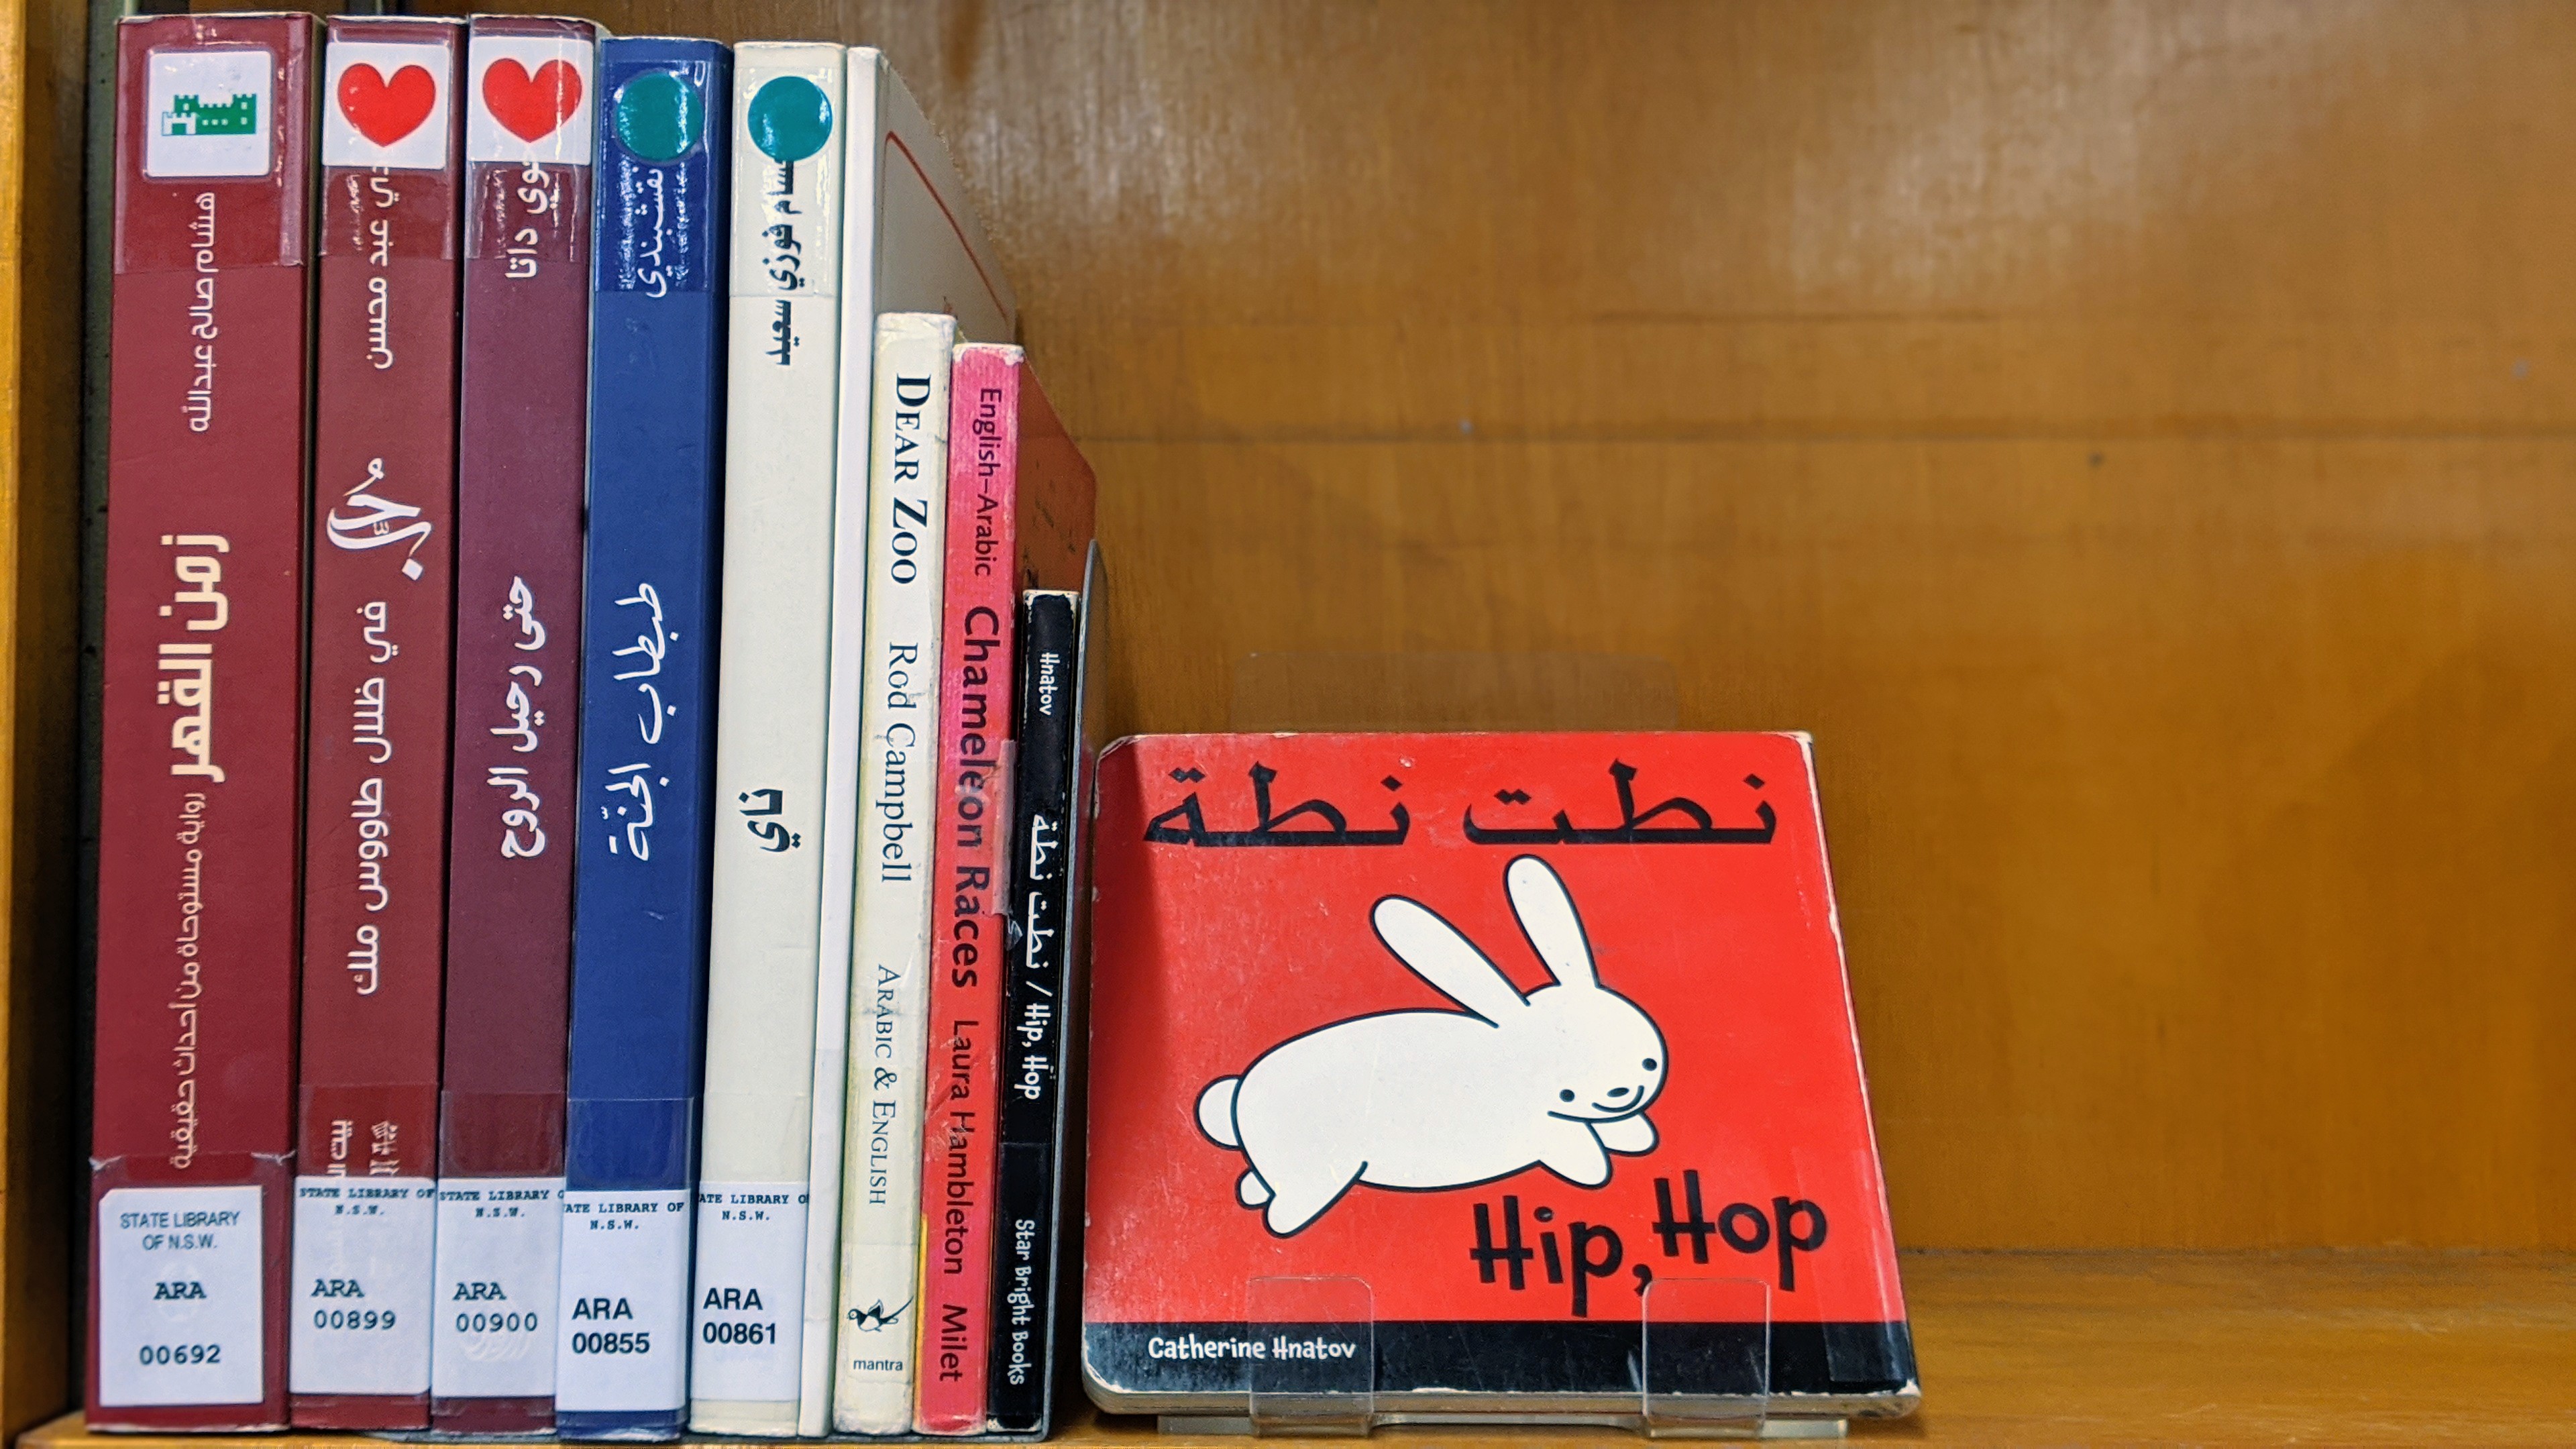 Photograph of the Arabic books on the shelf, spine view